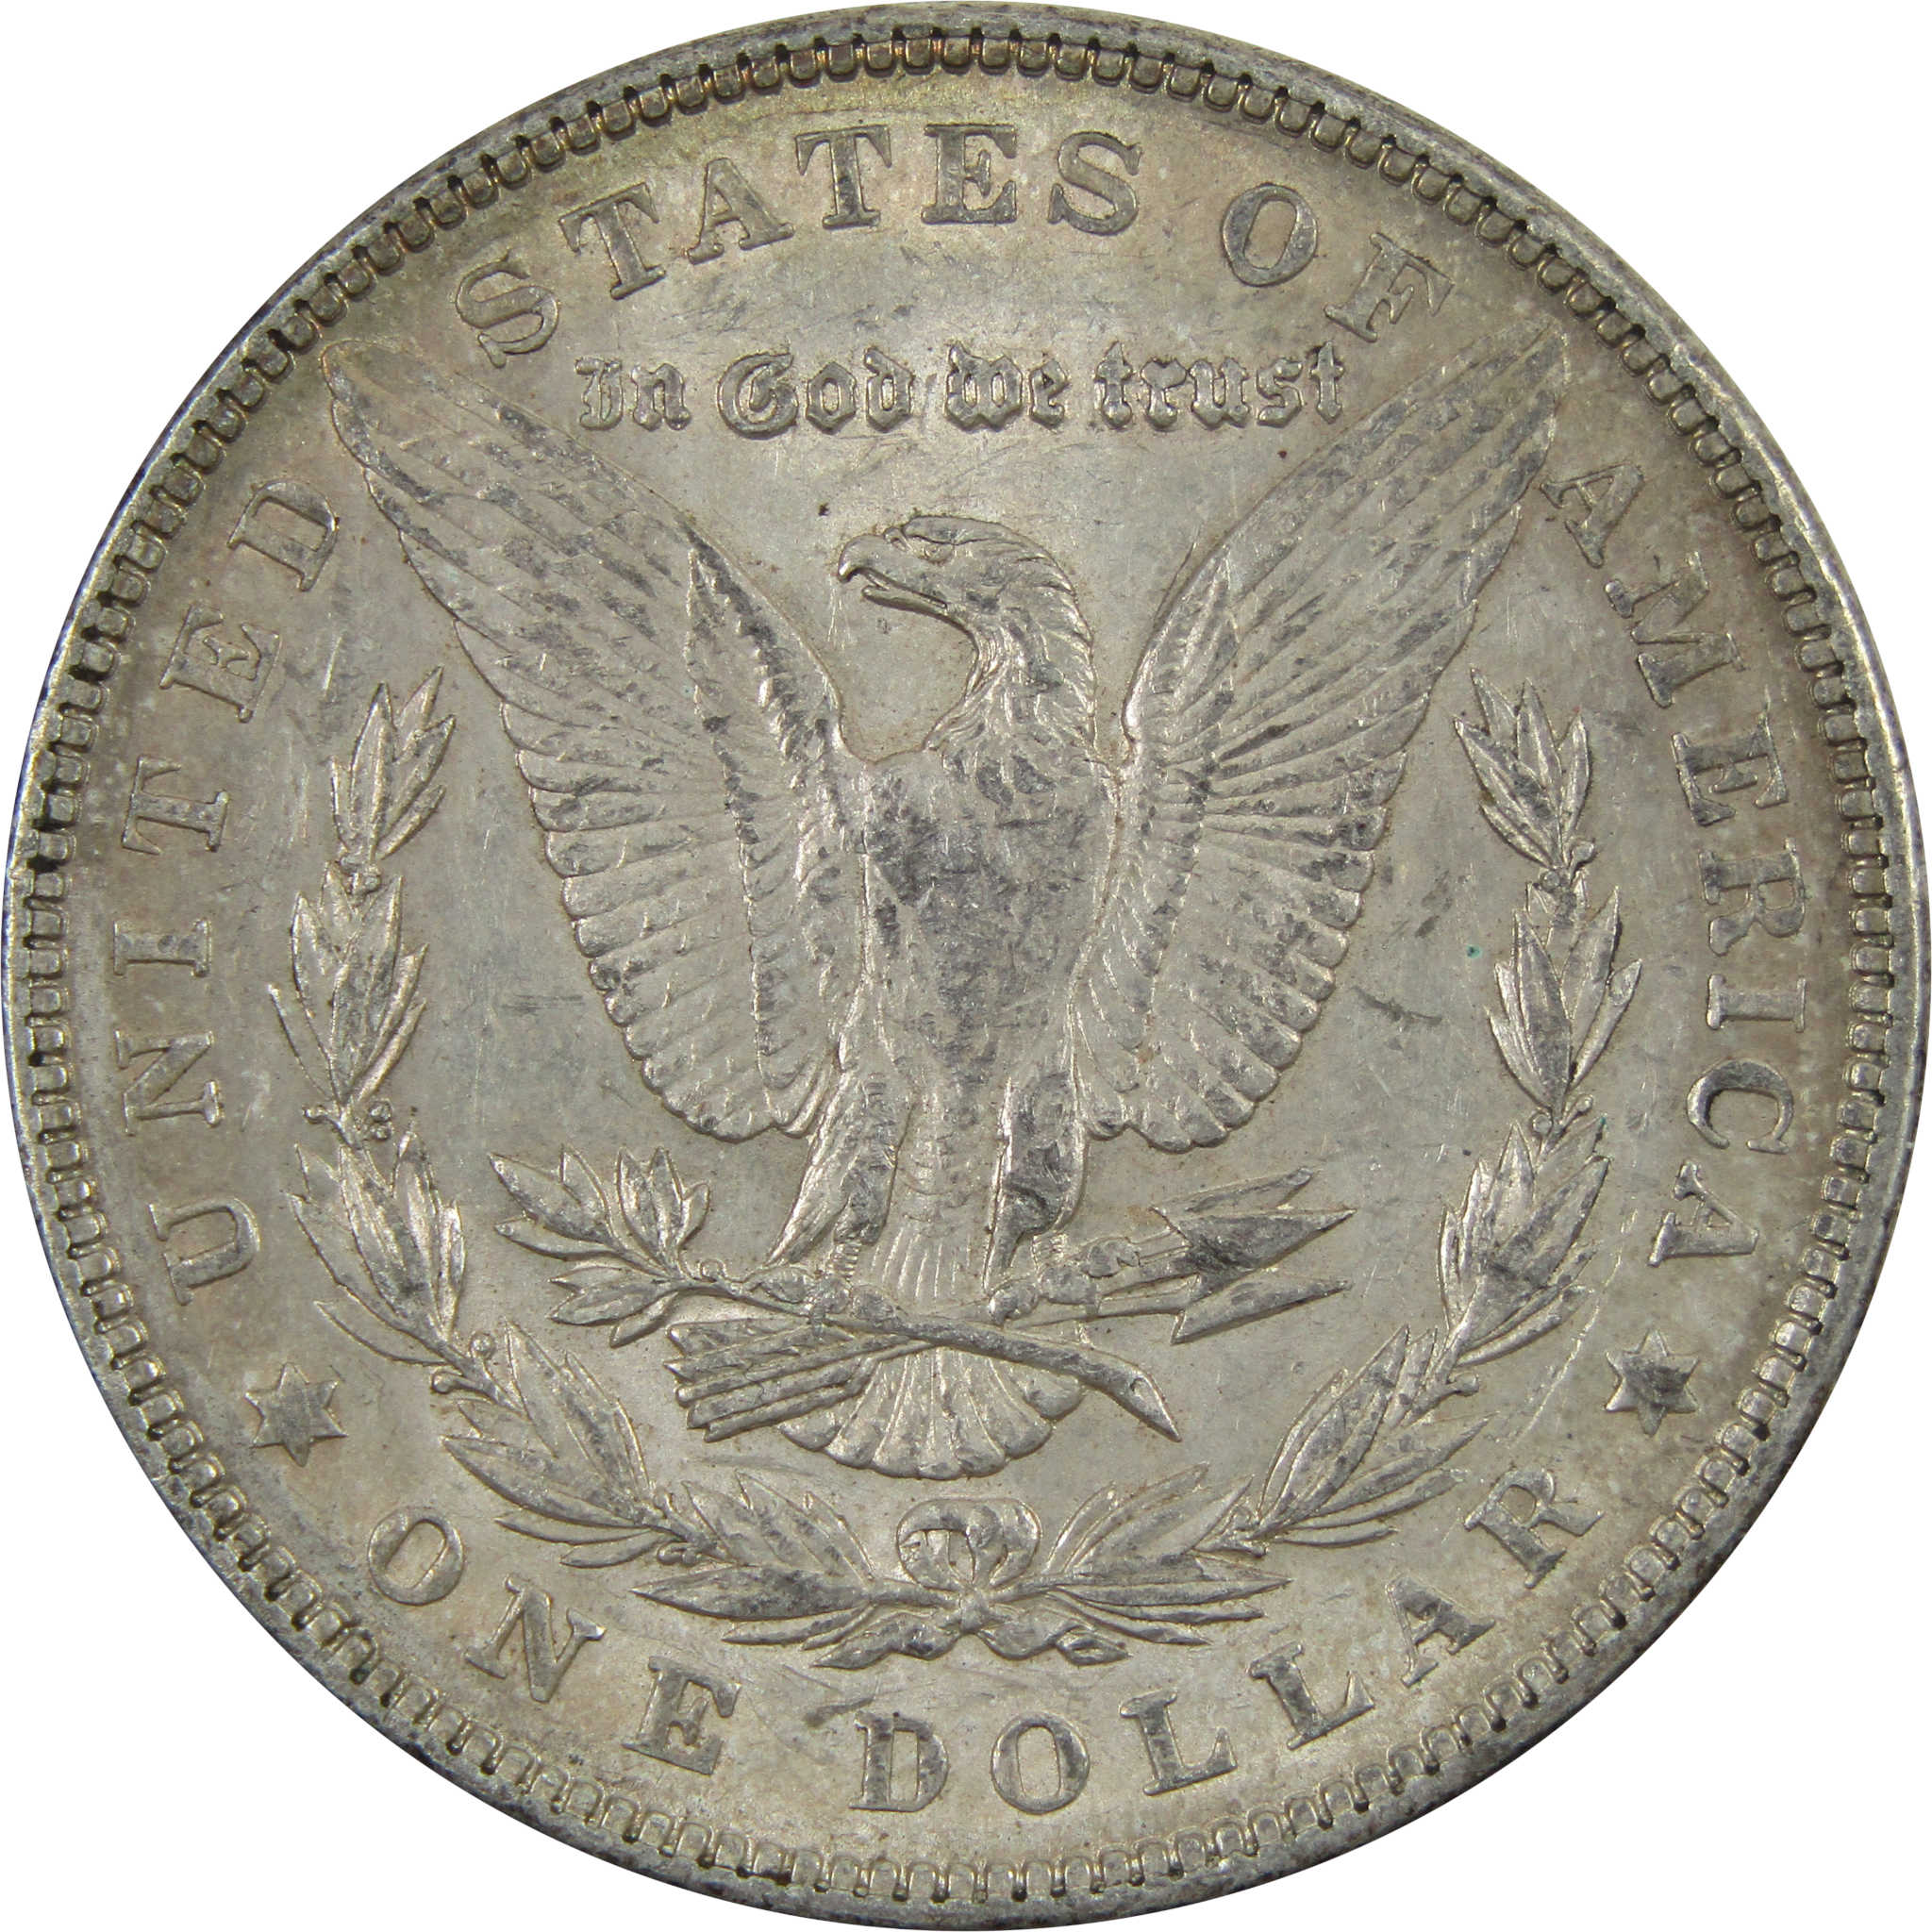 1902 Morgan Dollar AU About Uncirculated 90% Silver $1 Coin SKU:I4742 - Morgan coin - Morgan silver dollar - Morgan silver dollar for sale - Profile Coins &amp; Collectibles